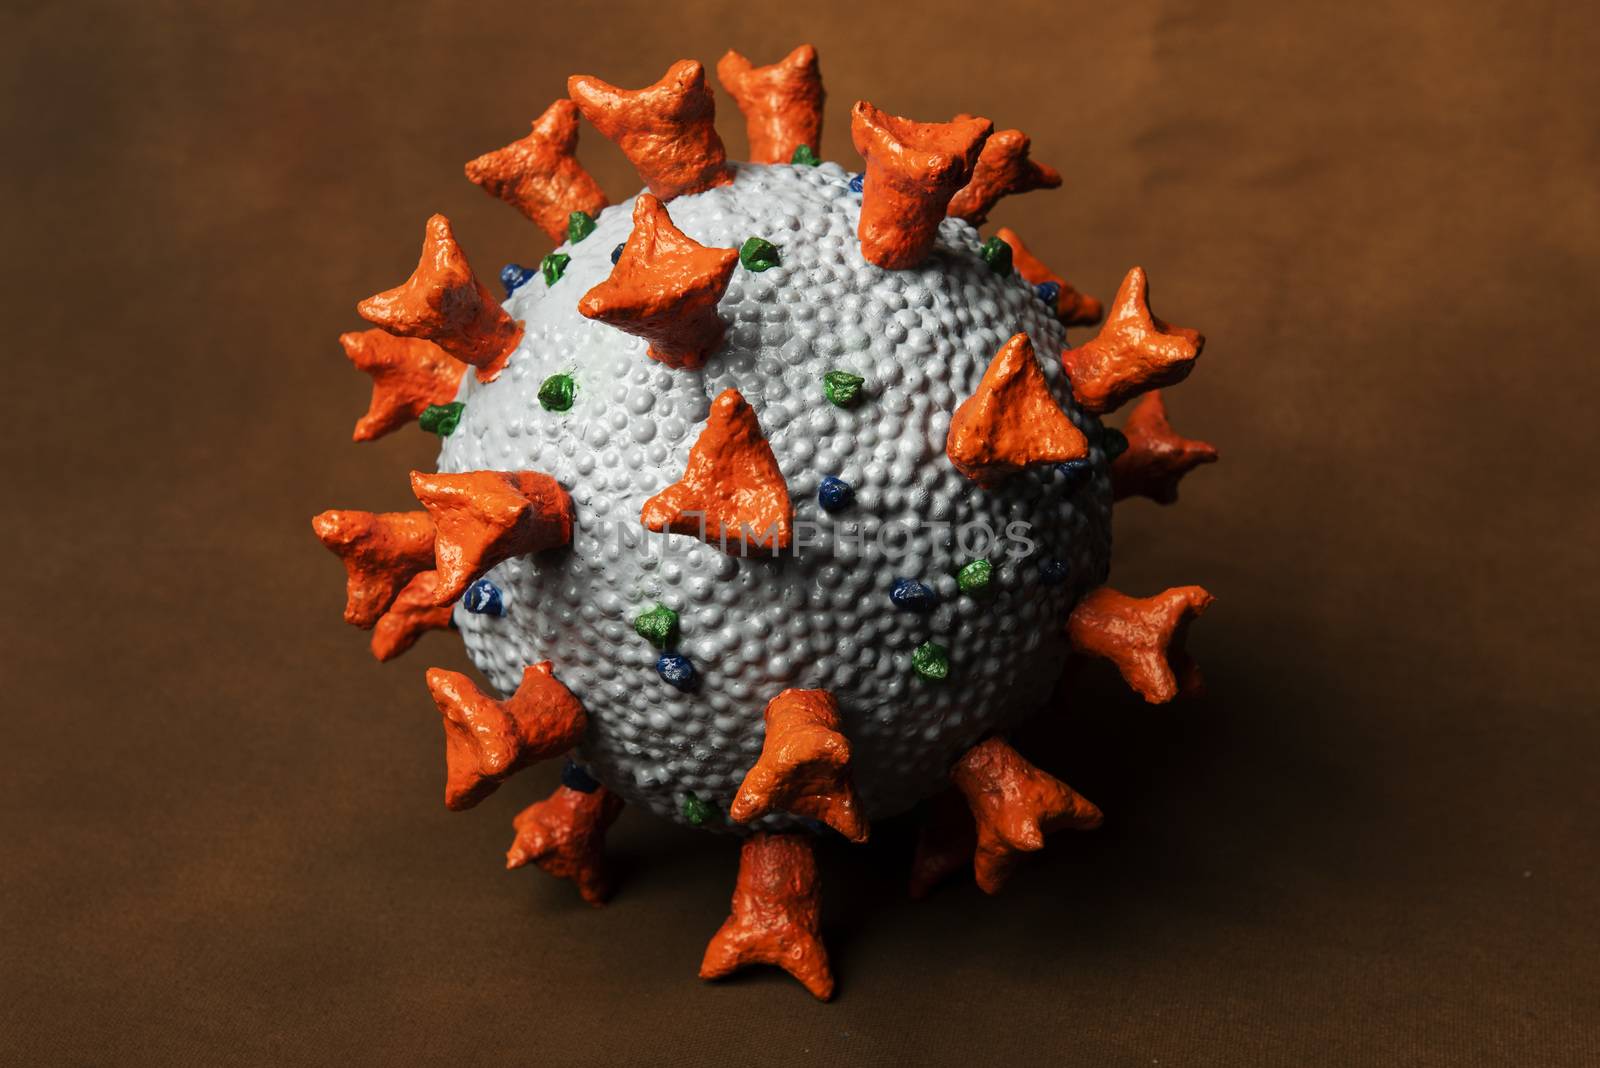 Homemade realistic model of Corona Virus SARS-CoV-2 used as a tool for science education for students in school. Dangerous coronavirus caused global pandemy in COVID-19 respiratory disease. On a brown background